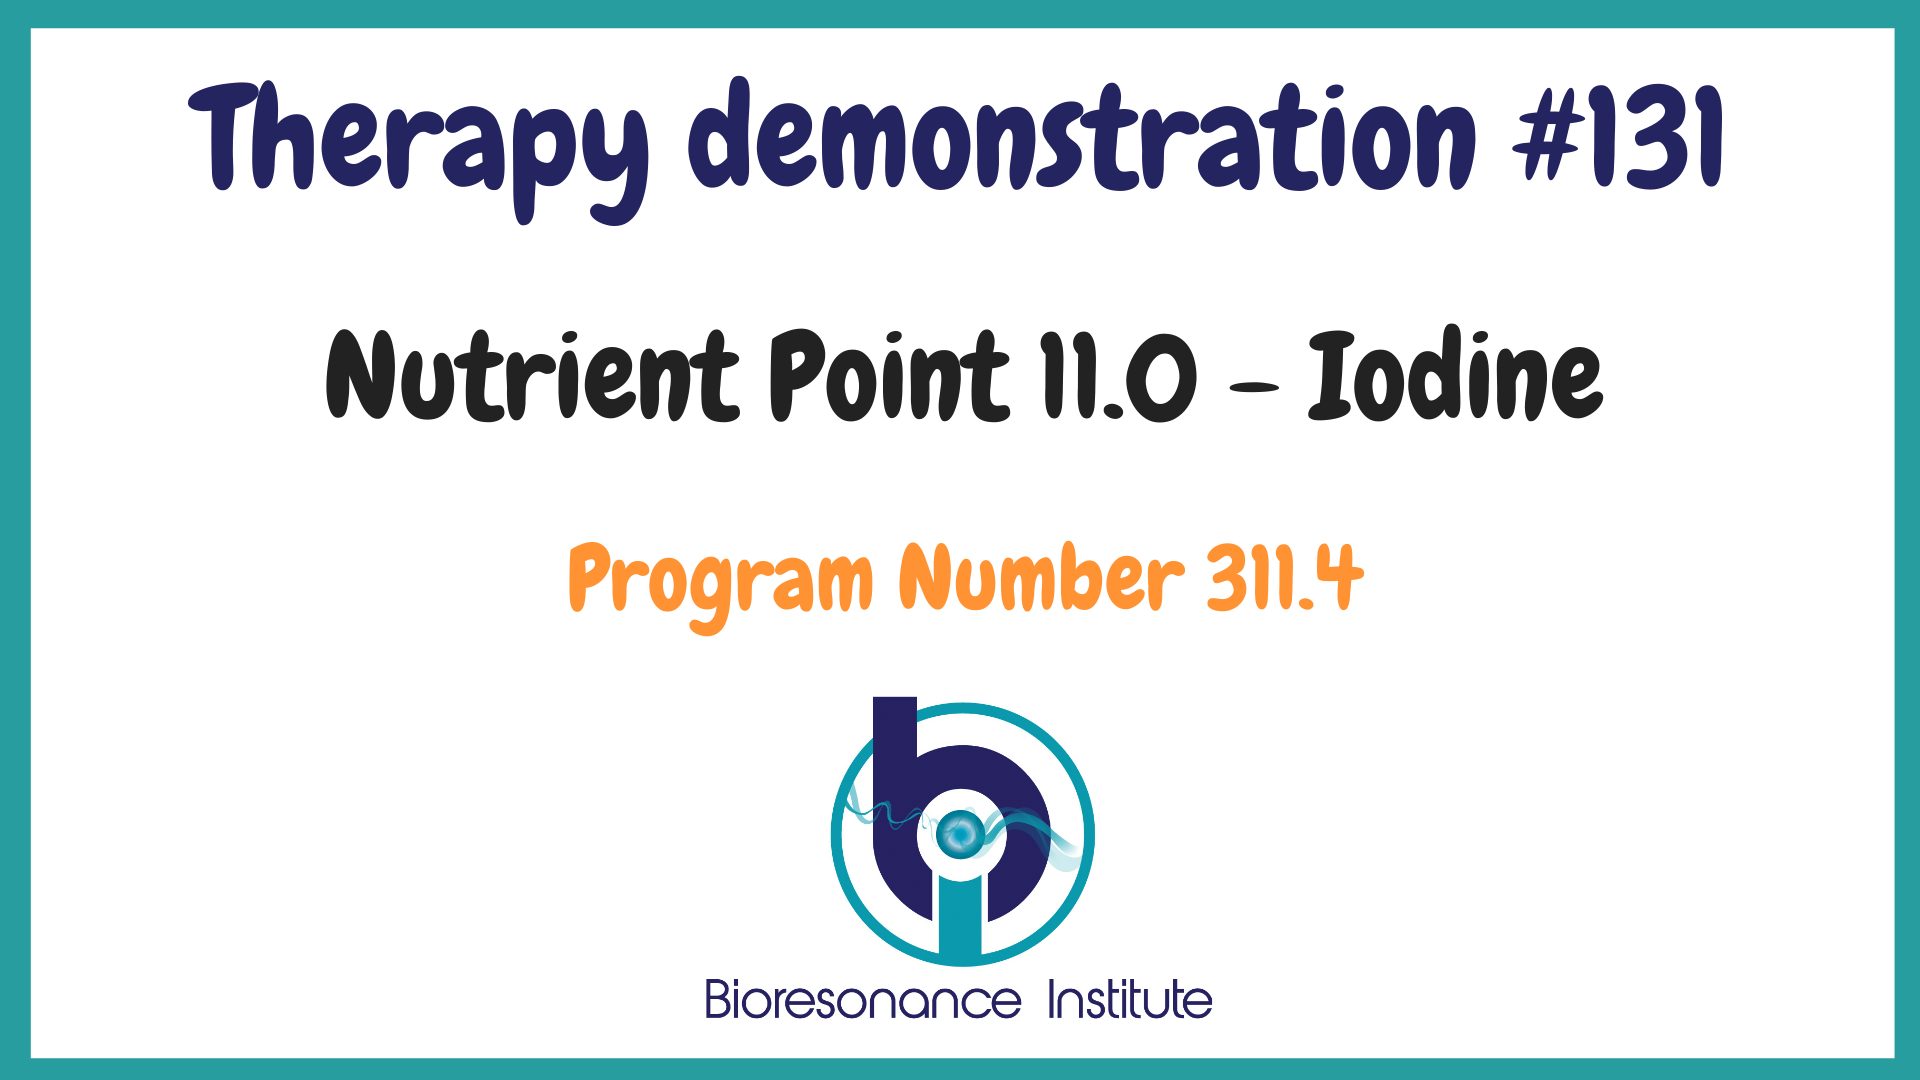 Nutrient point demonstration for Iodine